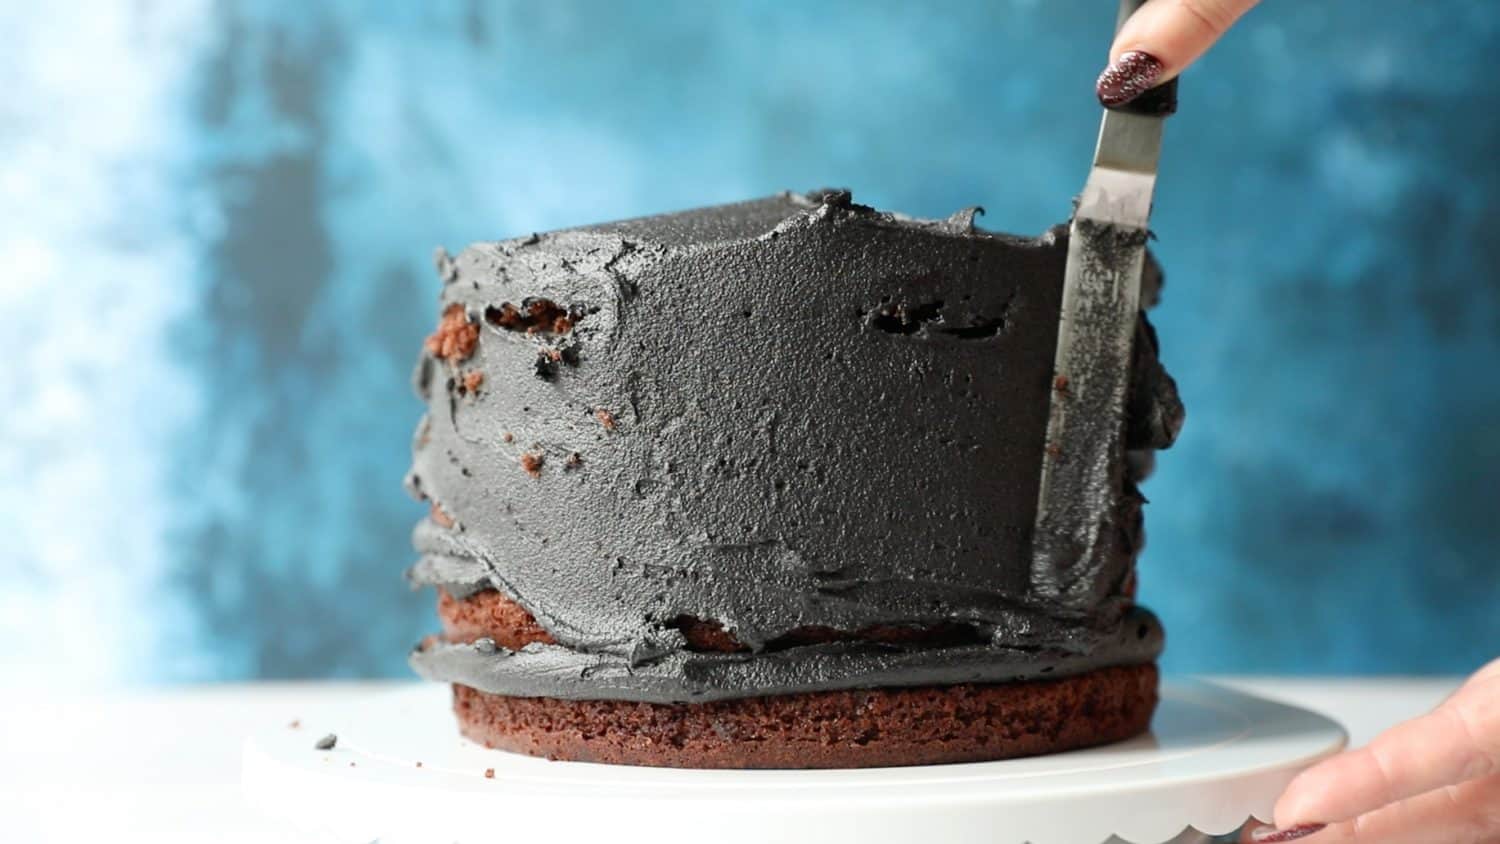 A five layer chocolate cake that has been covered in black buttercream icing. The icing is being spread over the cake using a spatula.